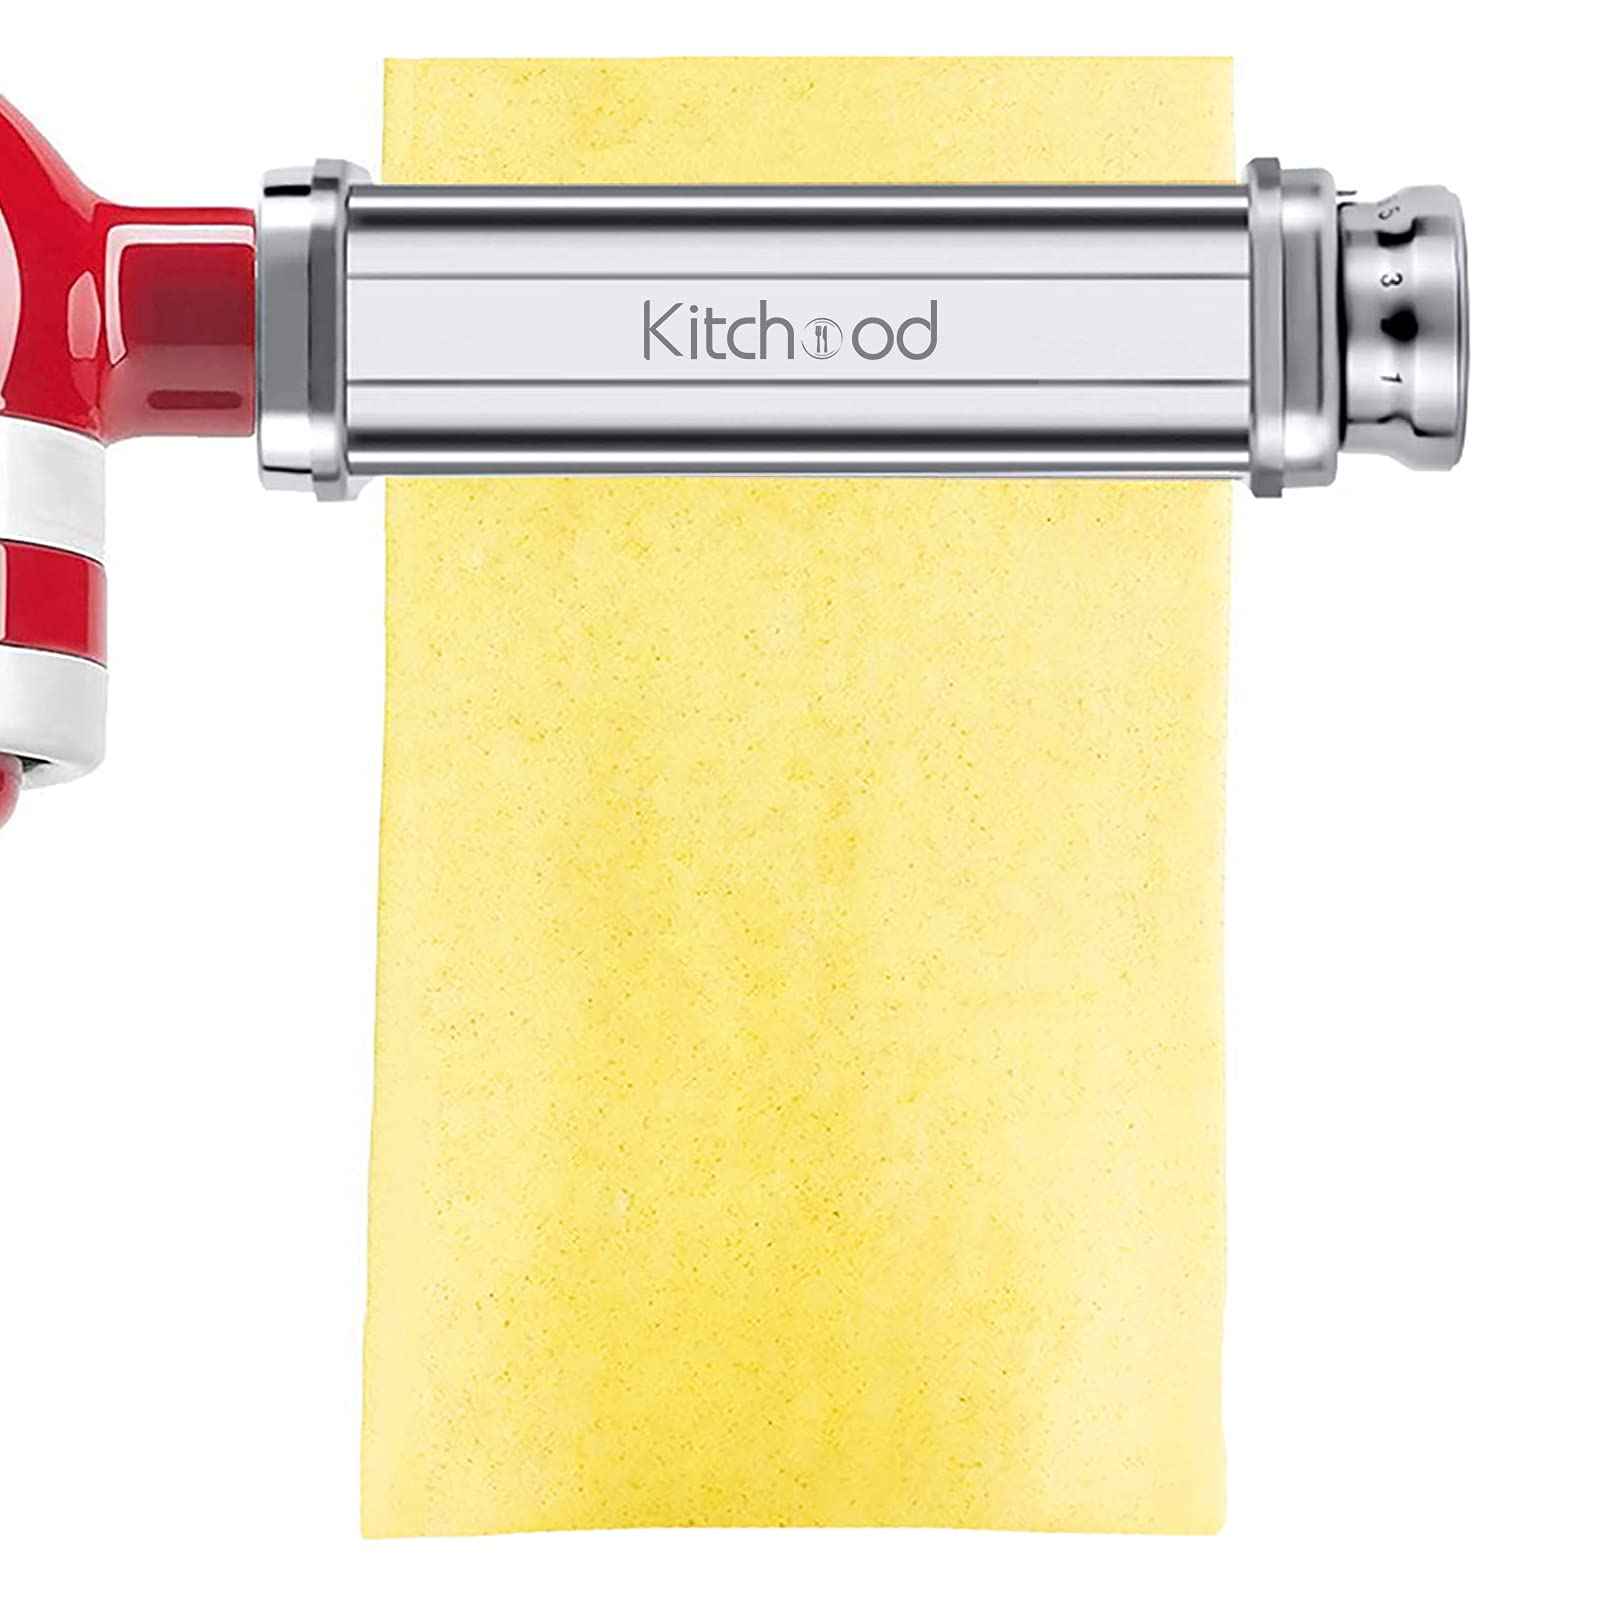 Pasta Attachment for KitchenAid Stand Mixers With Cleaning Brush,Pasta Maker Attachment for Kitchenaid 3-Piece Set Including Pasta Sheet Roller, Fettuccine Cutter, Spaghetti Cutter